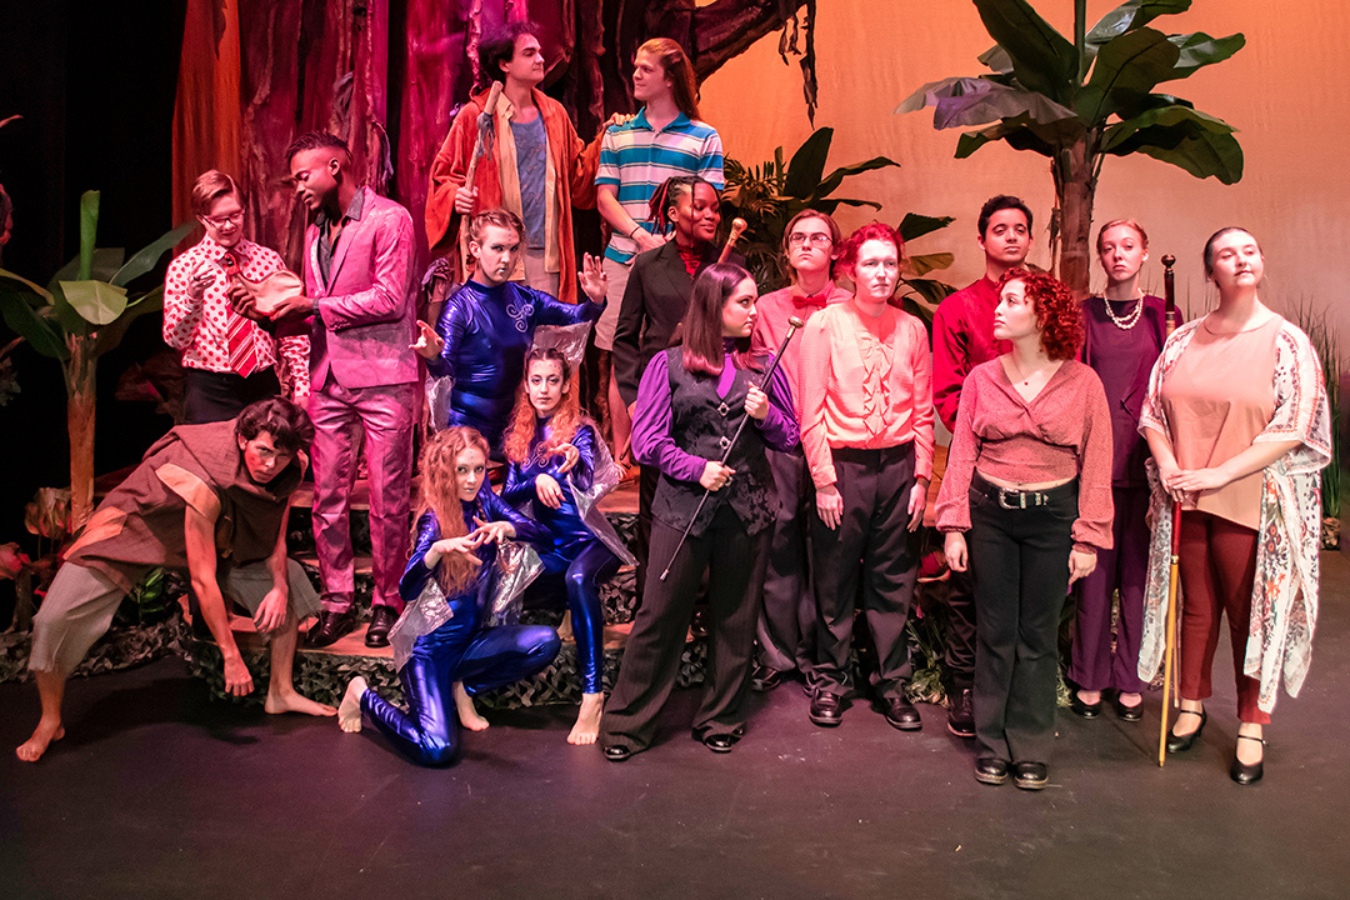 Vibrant group photo of performing arts students in costume for the play "The Tempest" during a dress rehearsal.